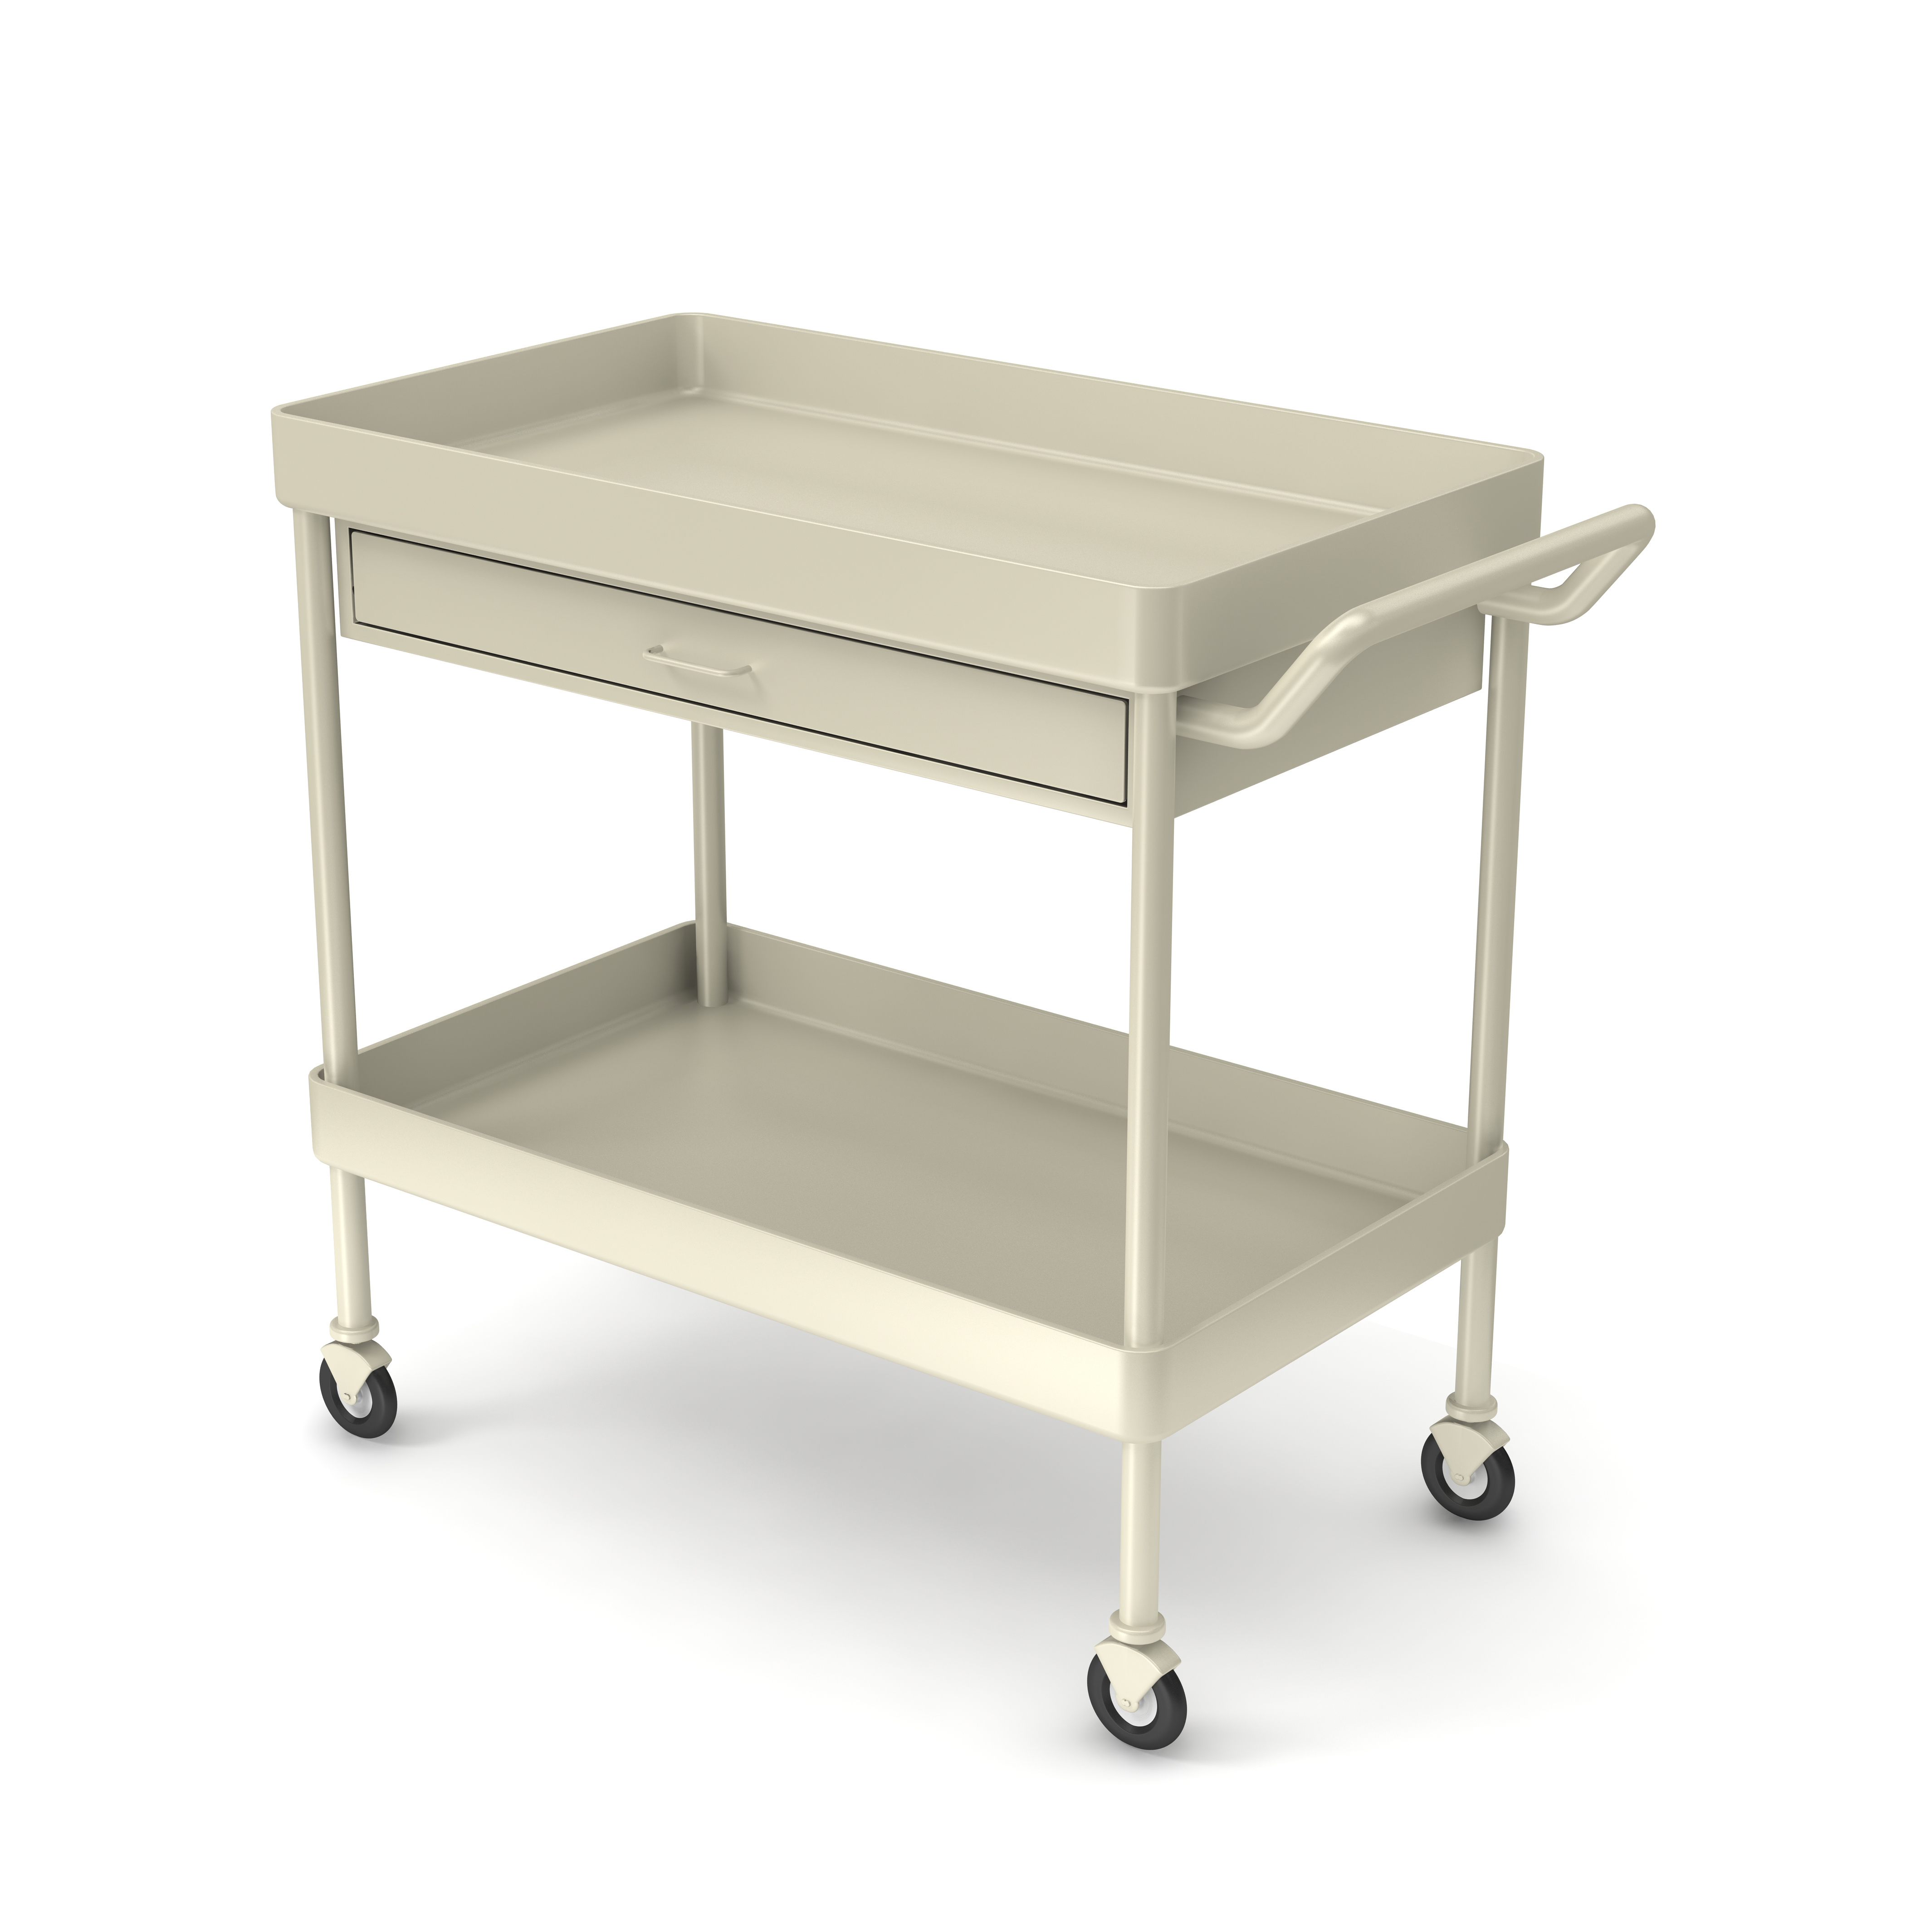 Details about   Utility Cart Trolley Drawer Storage 3Tier Tool Food Service Rolling Salon DK201H 